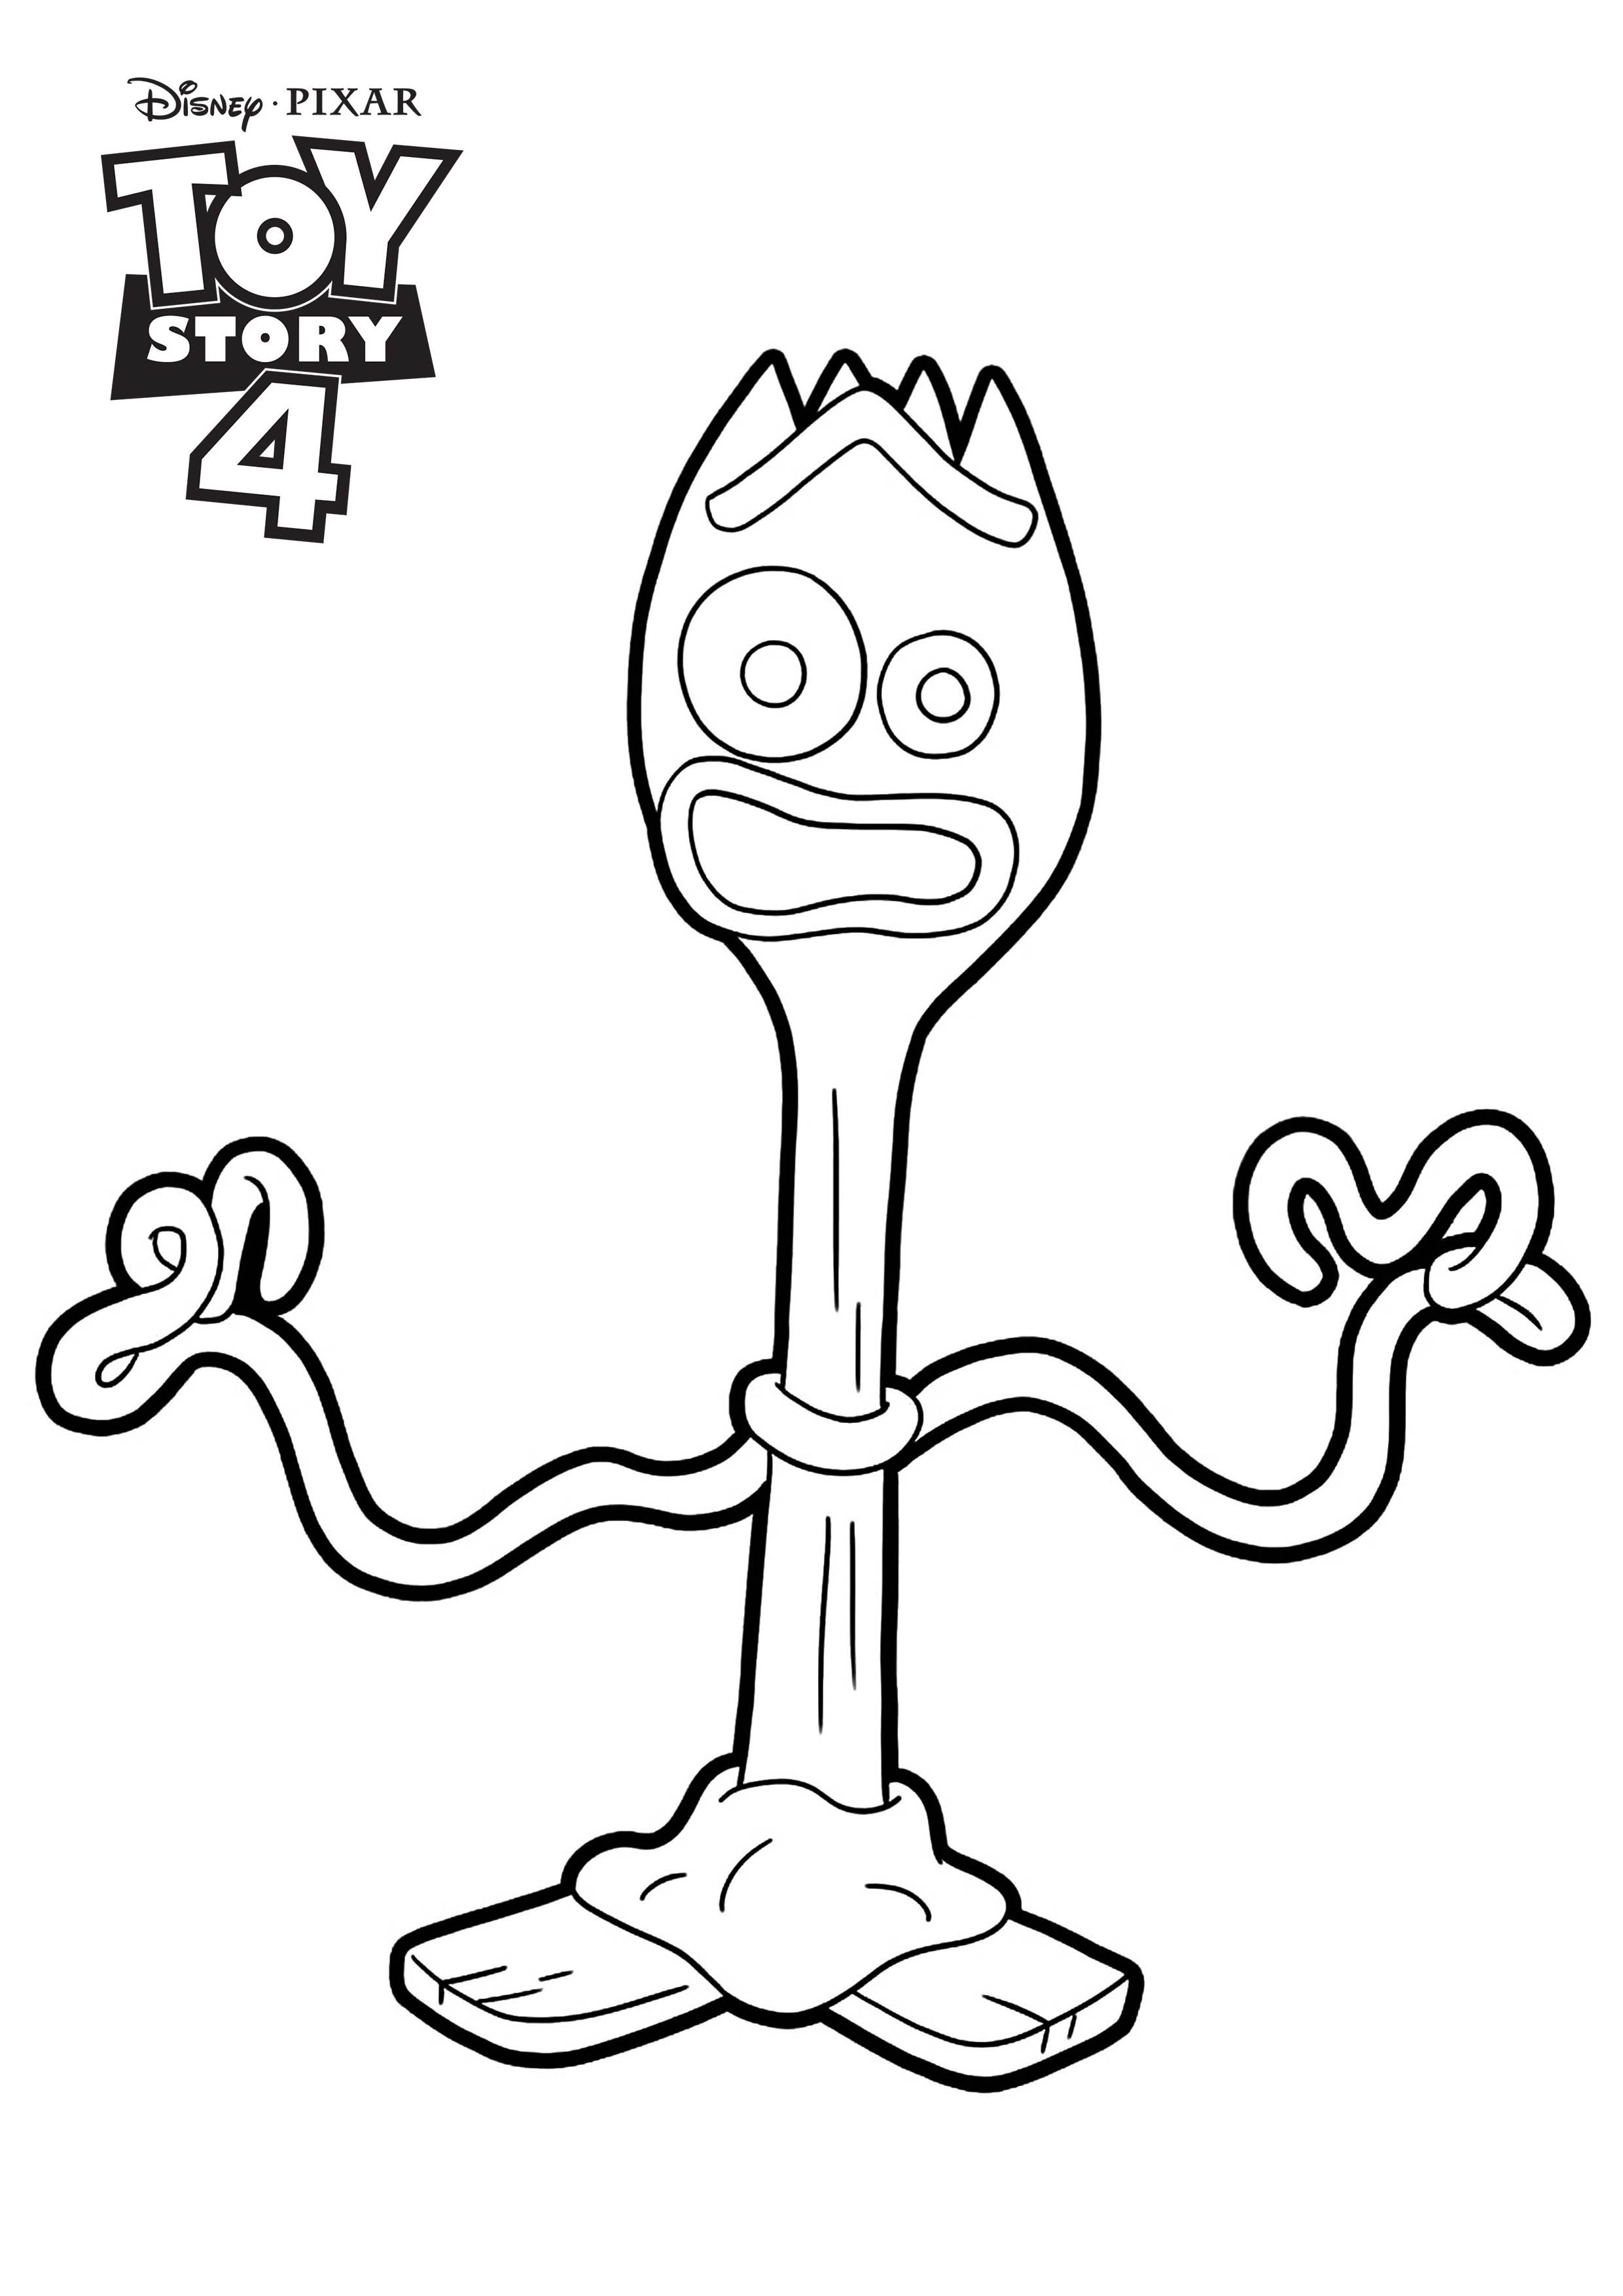 Forky : Toy Story 4 coloring page (Disney / Pixar) Toy Story 4 Kids